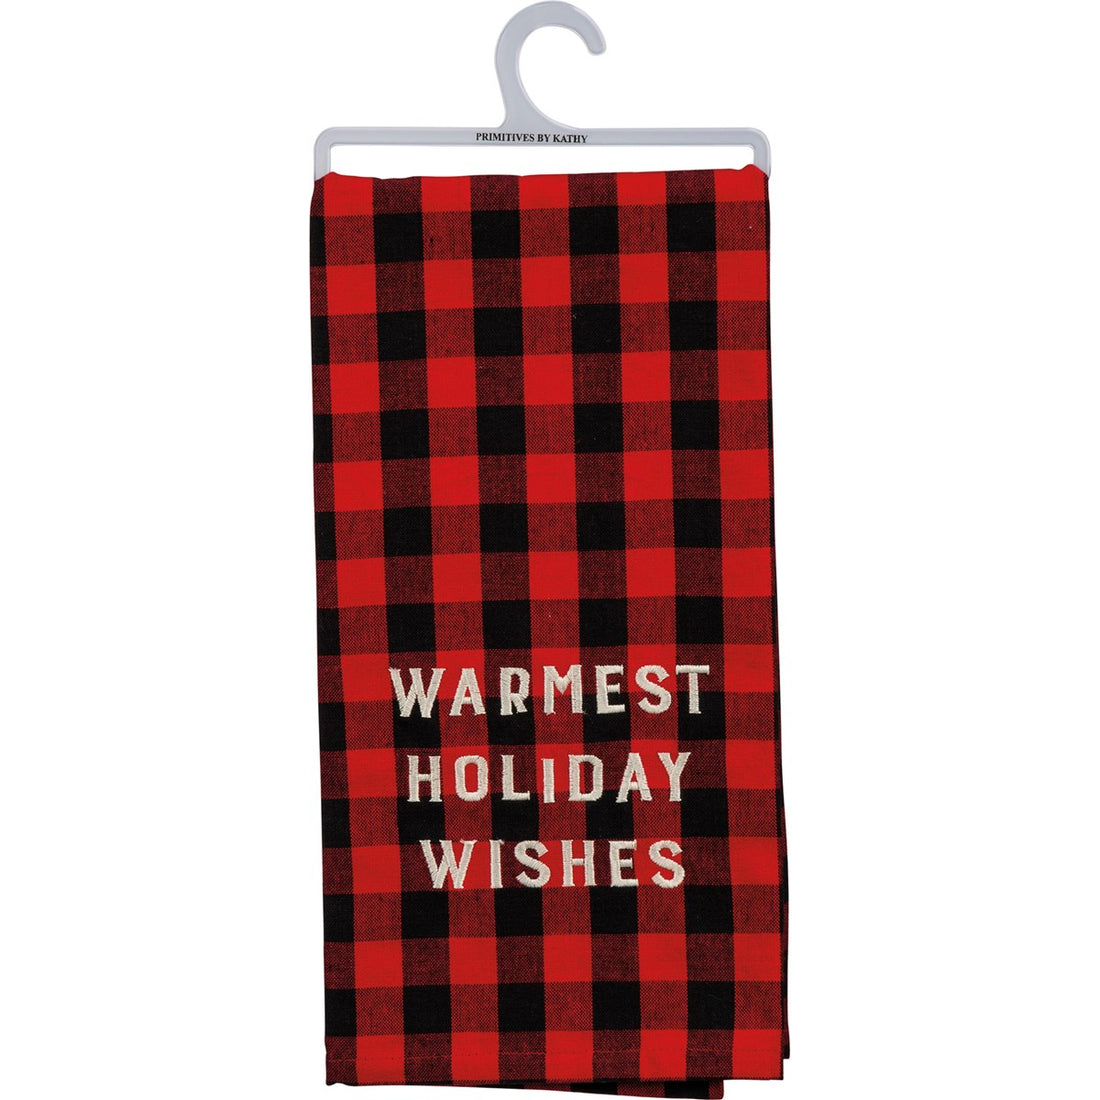 Warmest Holiday Wishes Kitchen Towel